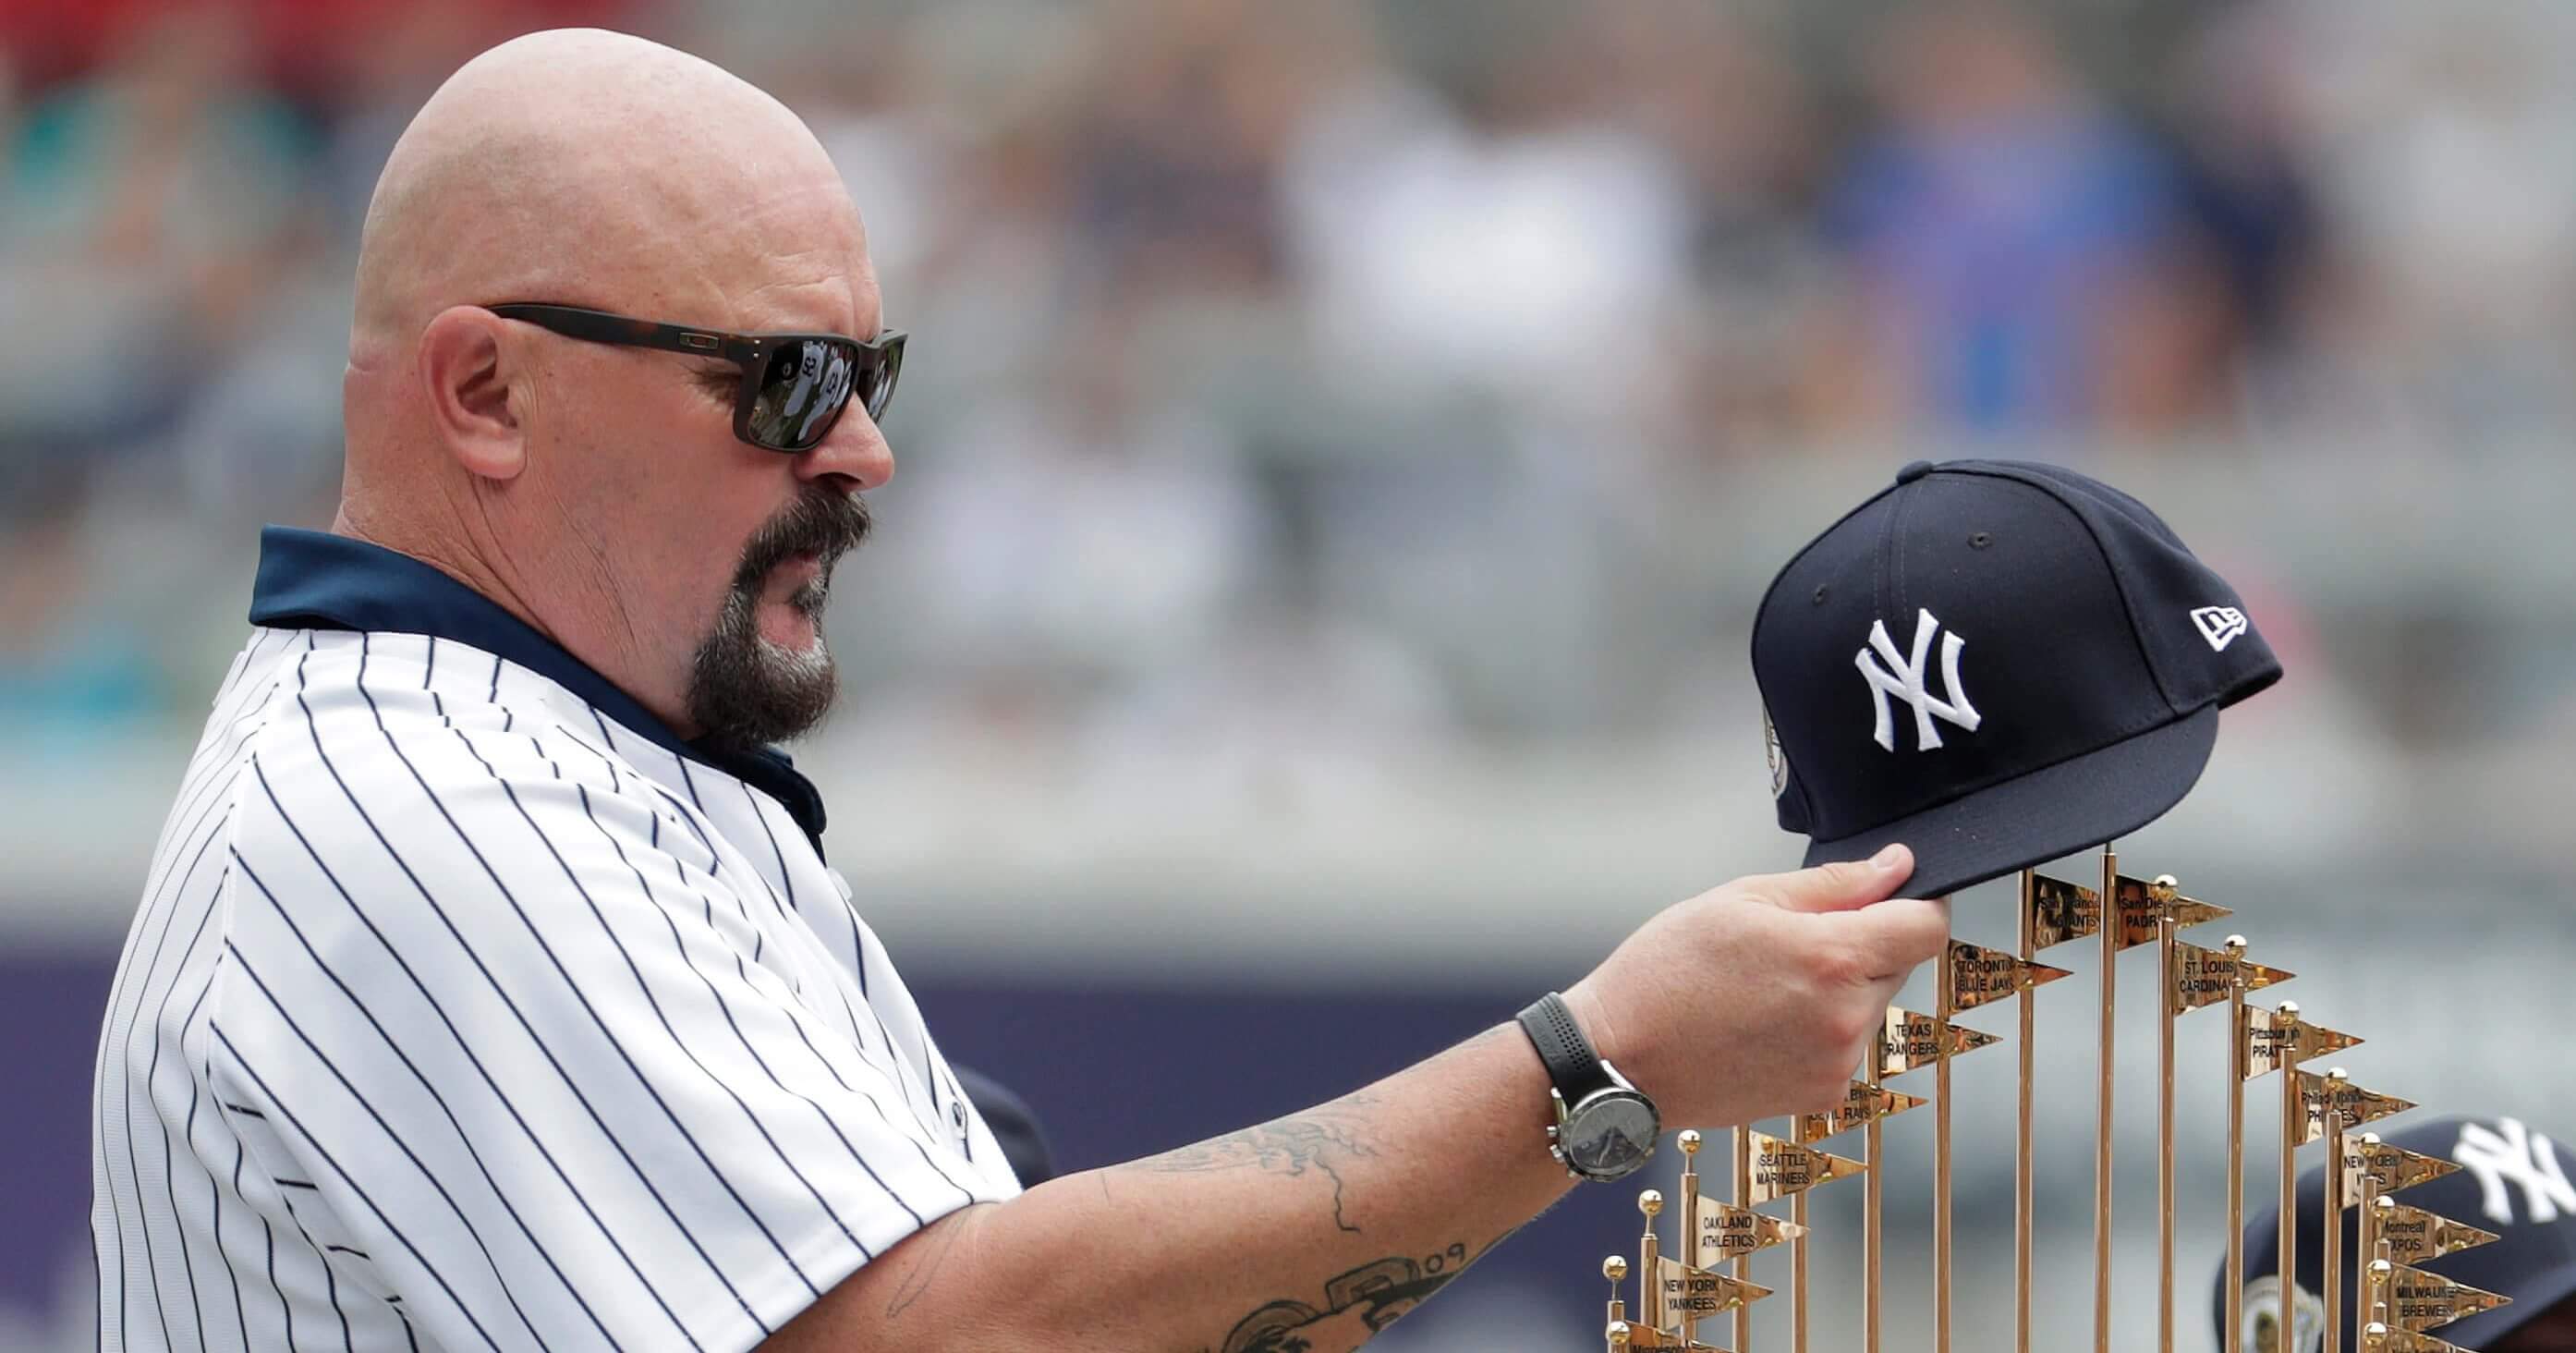 Former New York Yankees pitcher David Wells puts his hat on the 1998 World Series trophy during a ceremony honoring the team prior to a baseball game between the New York Yankees and the Toronto Blue Jays Saturday in New York.